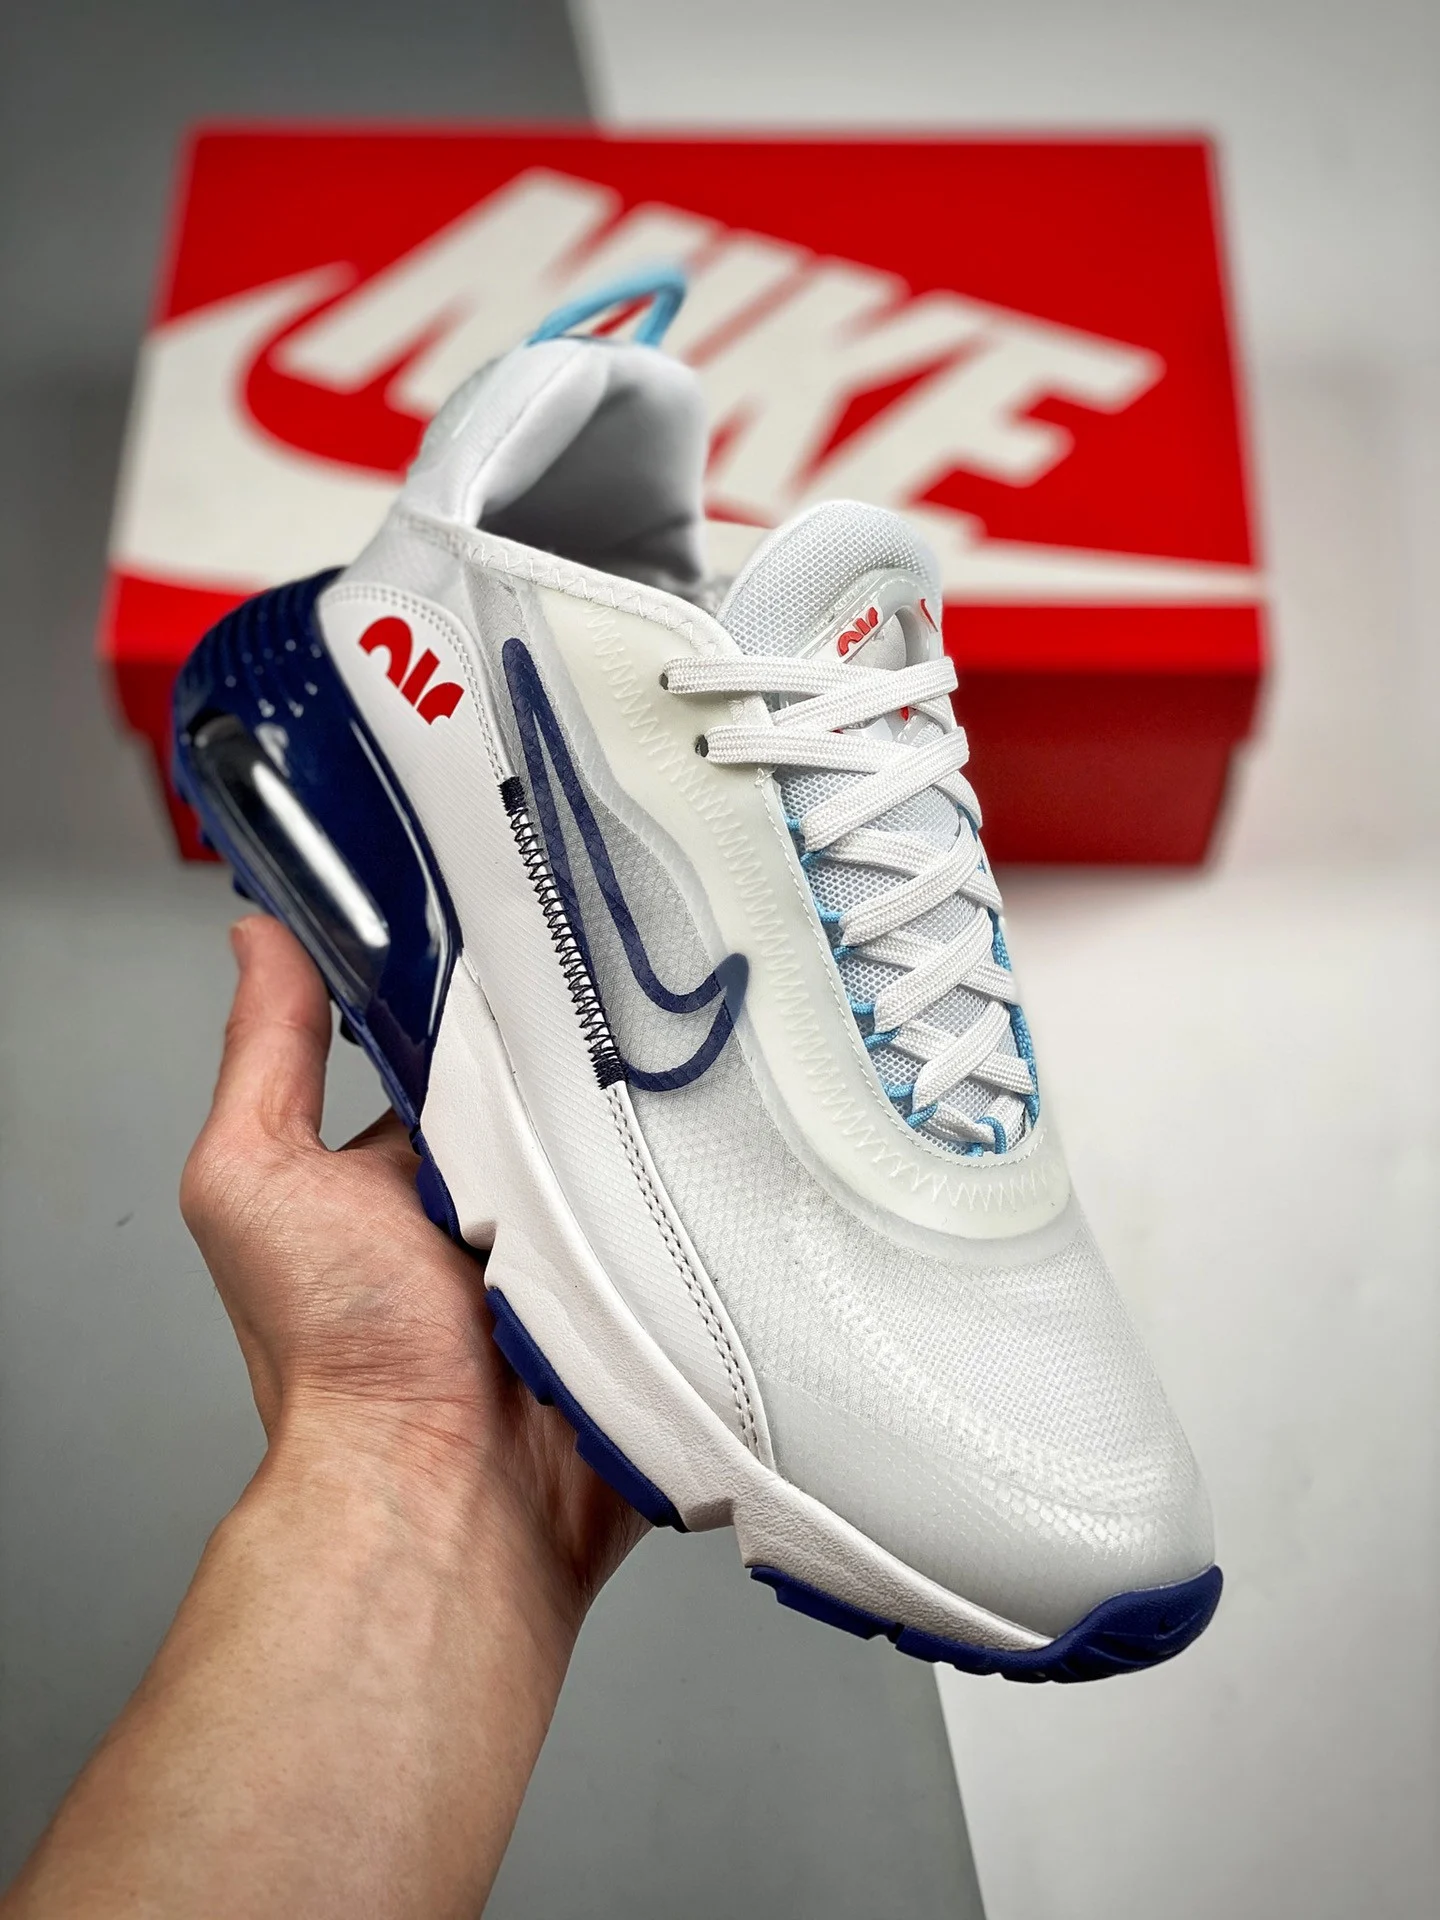 Nike Air Max 2090 White Navy Red DM2823-100 On Sale